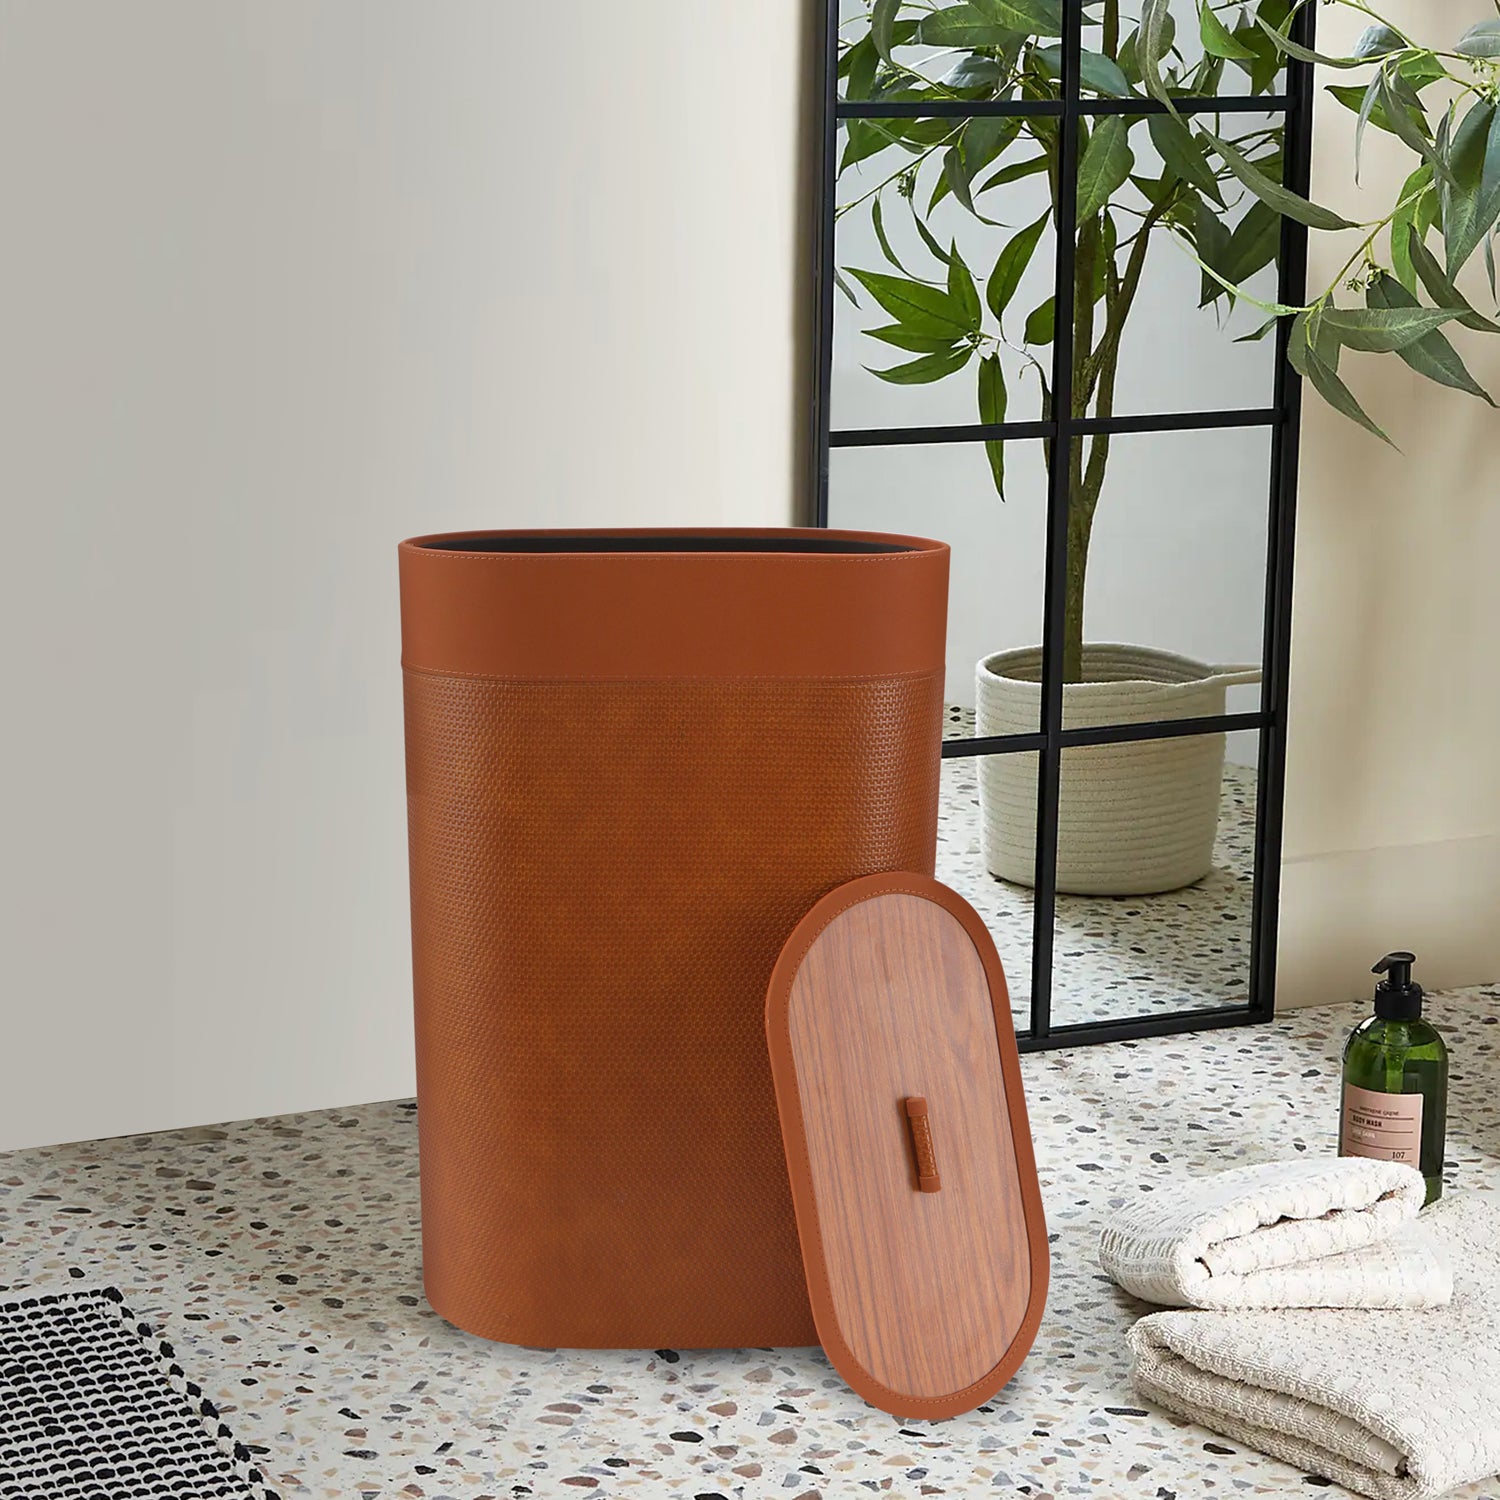 Laundry Bin - Tan Leatherette 1- The Home Co.